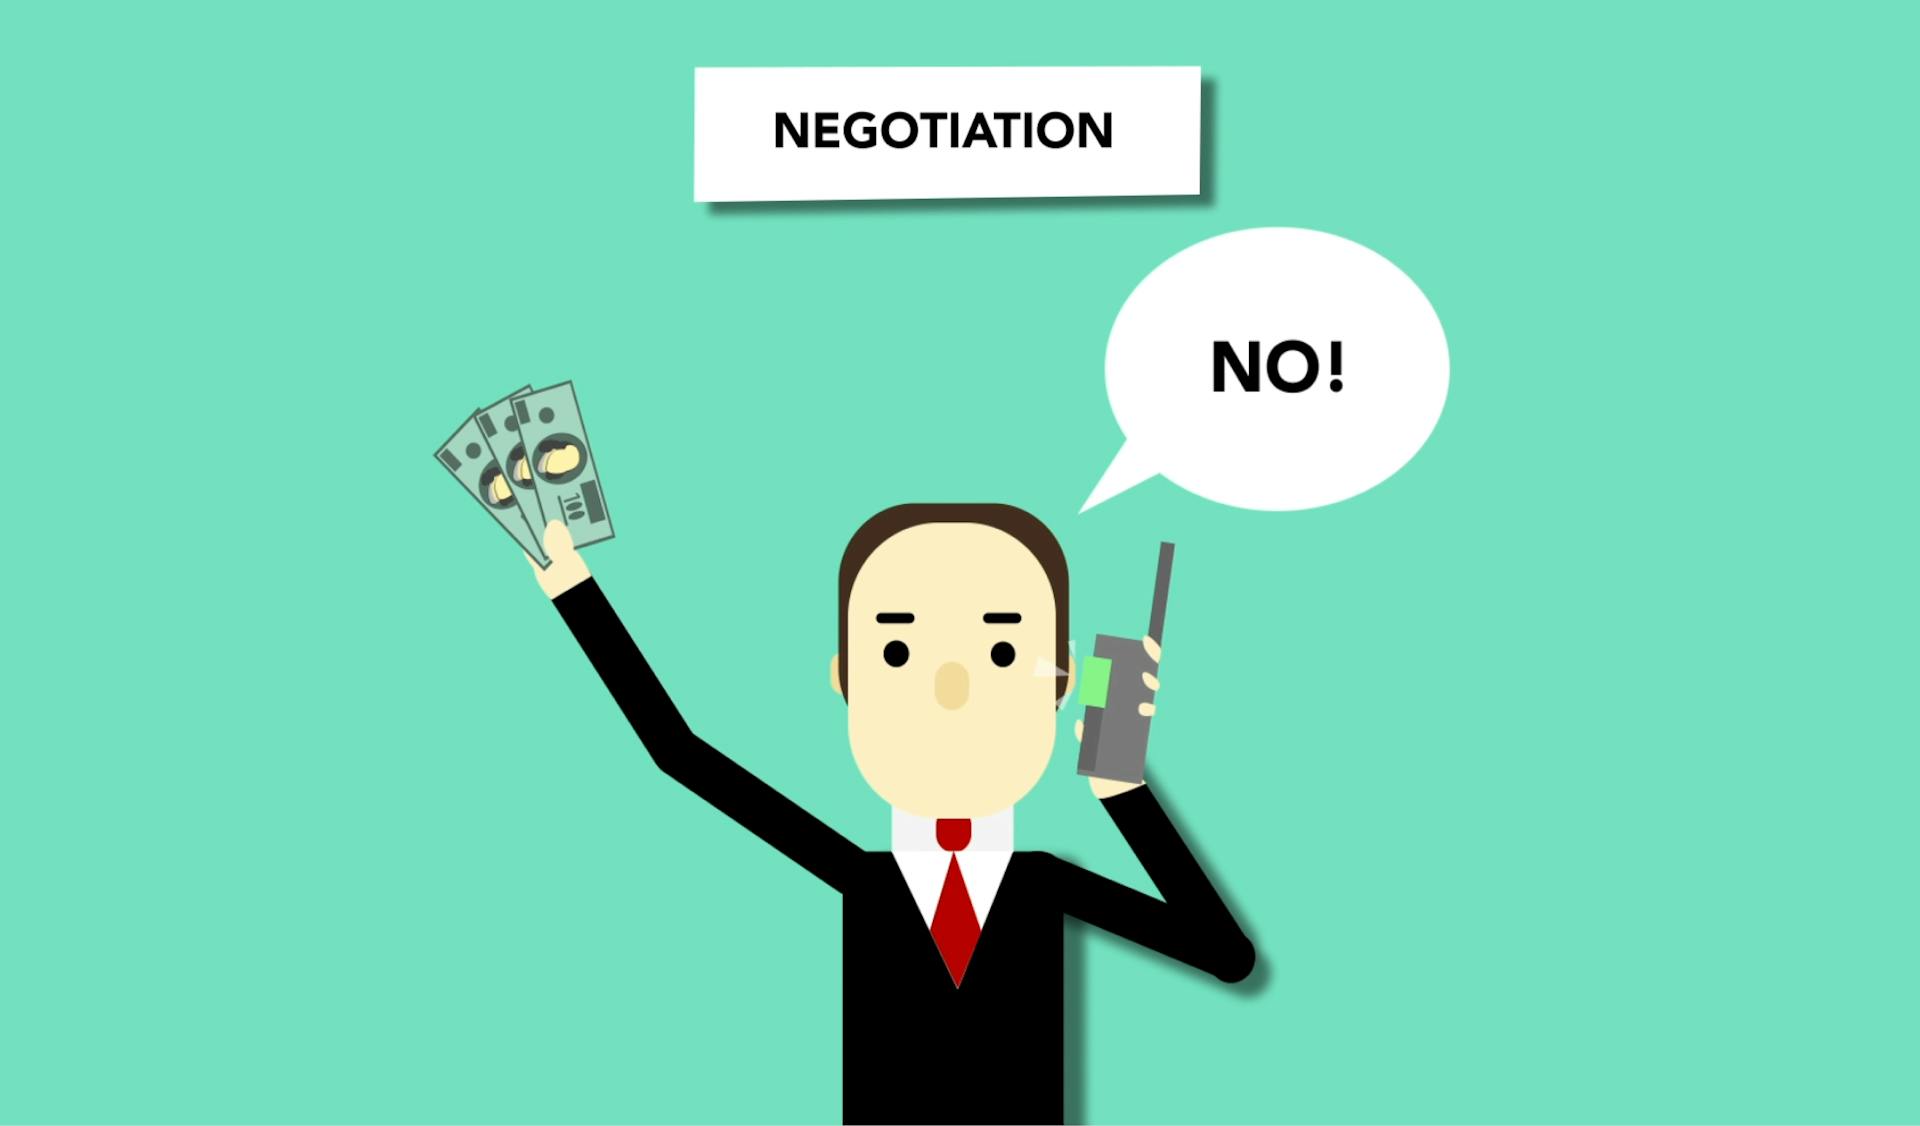 Concept illustration of man with money saying no to offer during business negations on phone